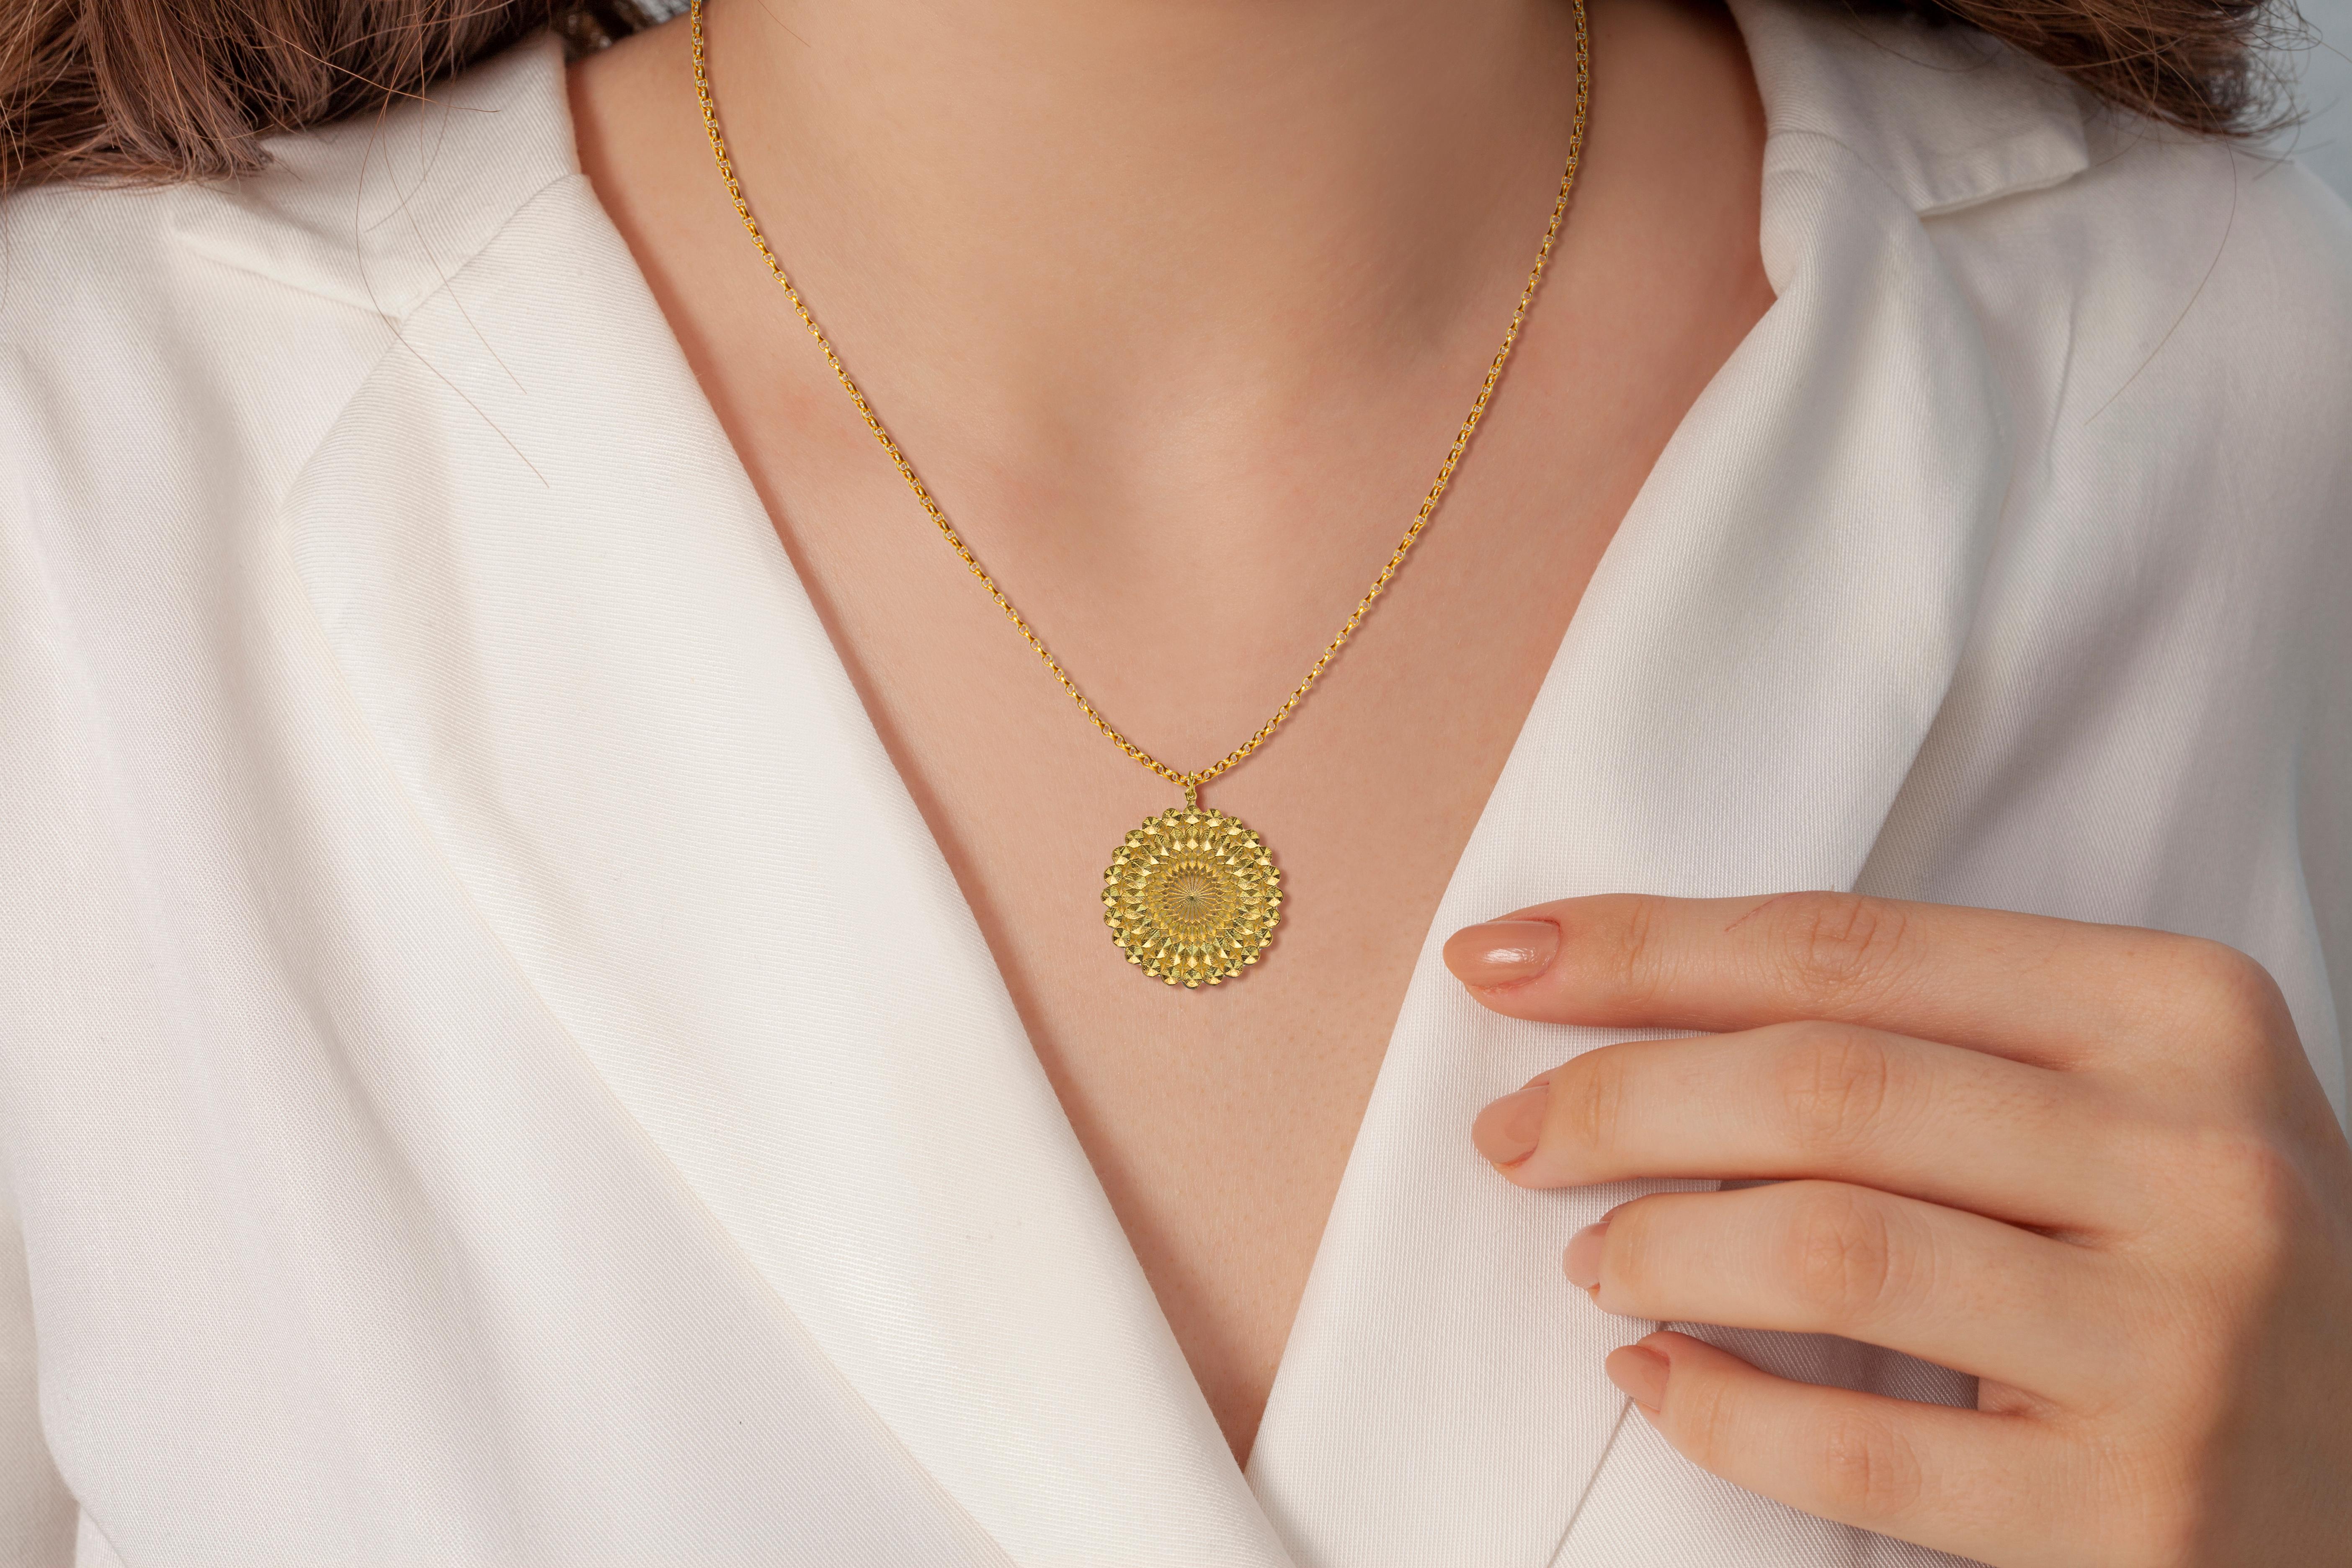 The fabulous 18K yellow gold Geometric sun pendant will brighten up your day and night. This statement pendant was inspired by Persian geometry and sun symbol which has been used in variety of cultures since ancient times and is associated with